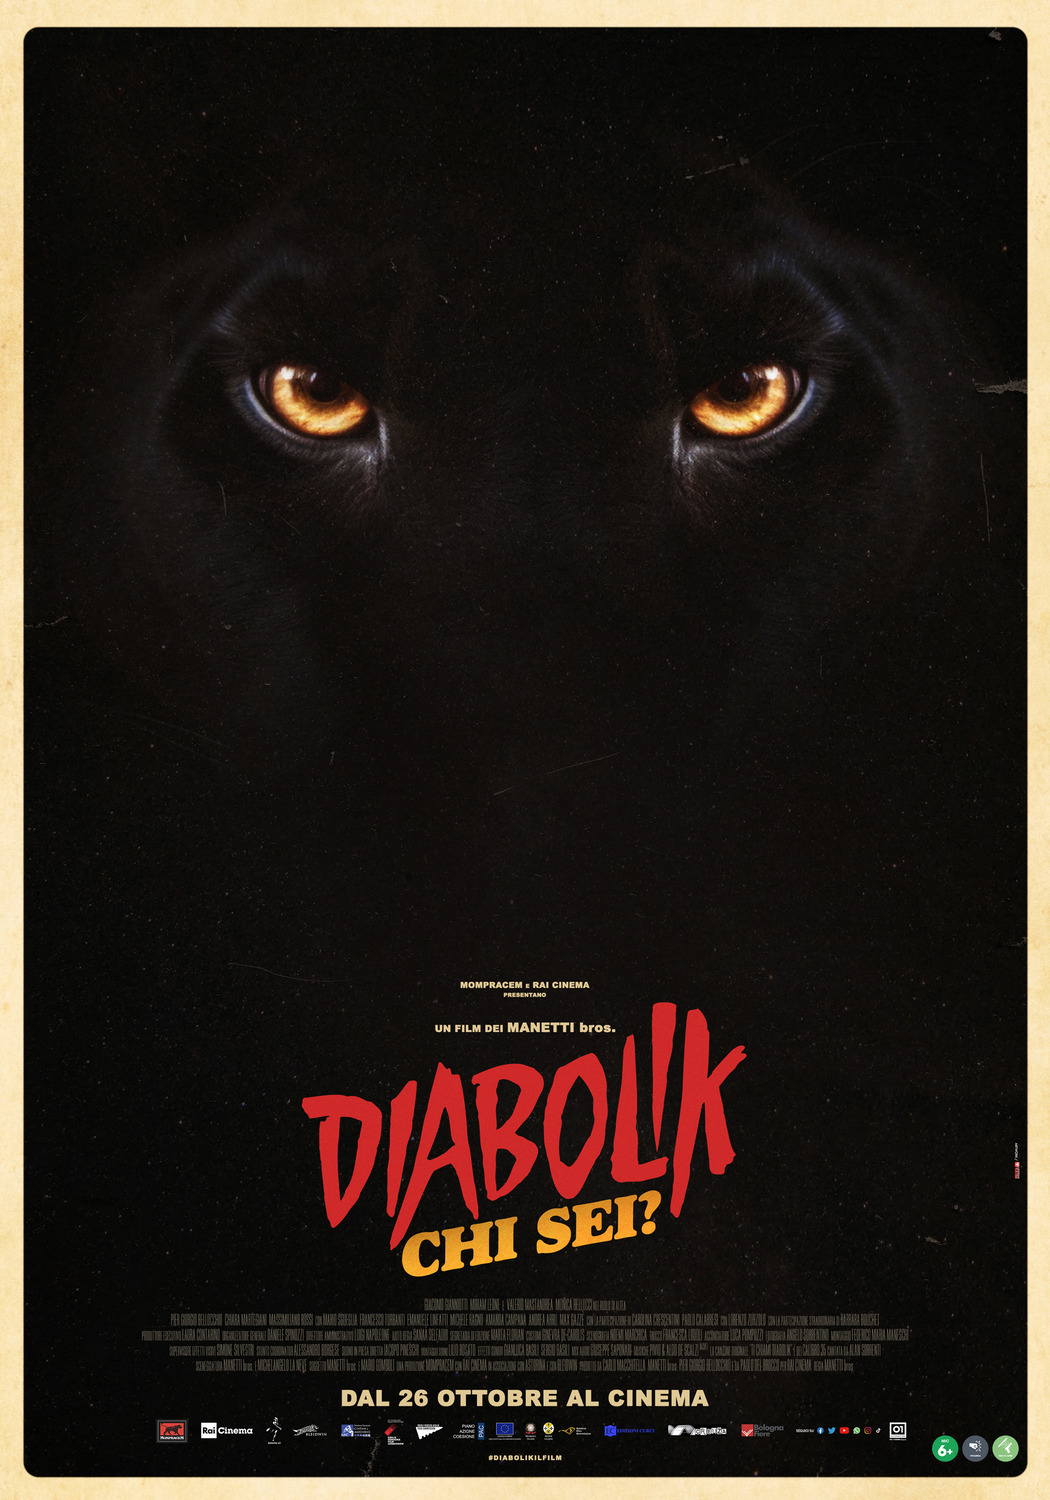 Extra Large Movie Poster Image for Diabolik chi sei? (#1 of 6)